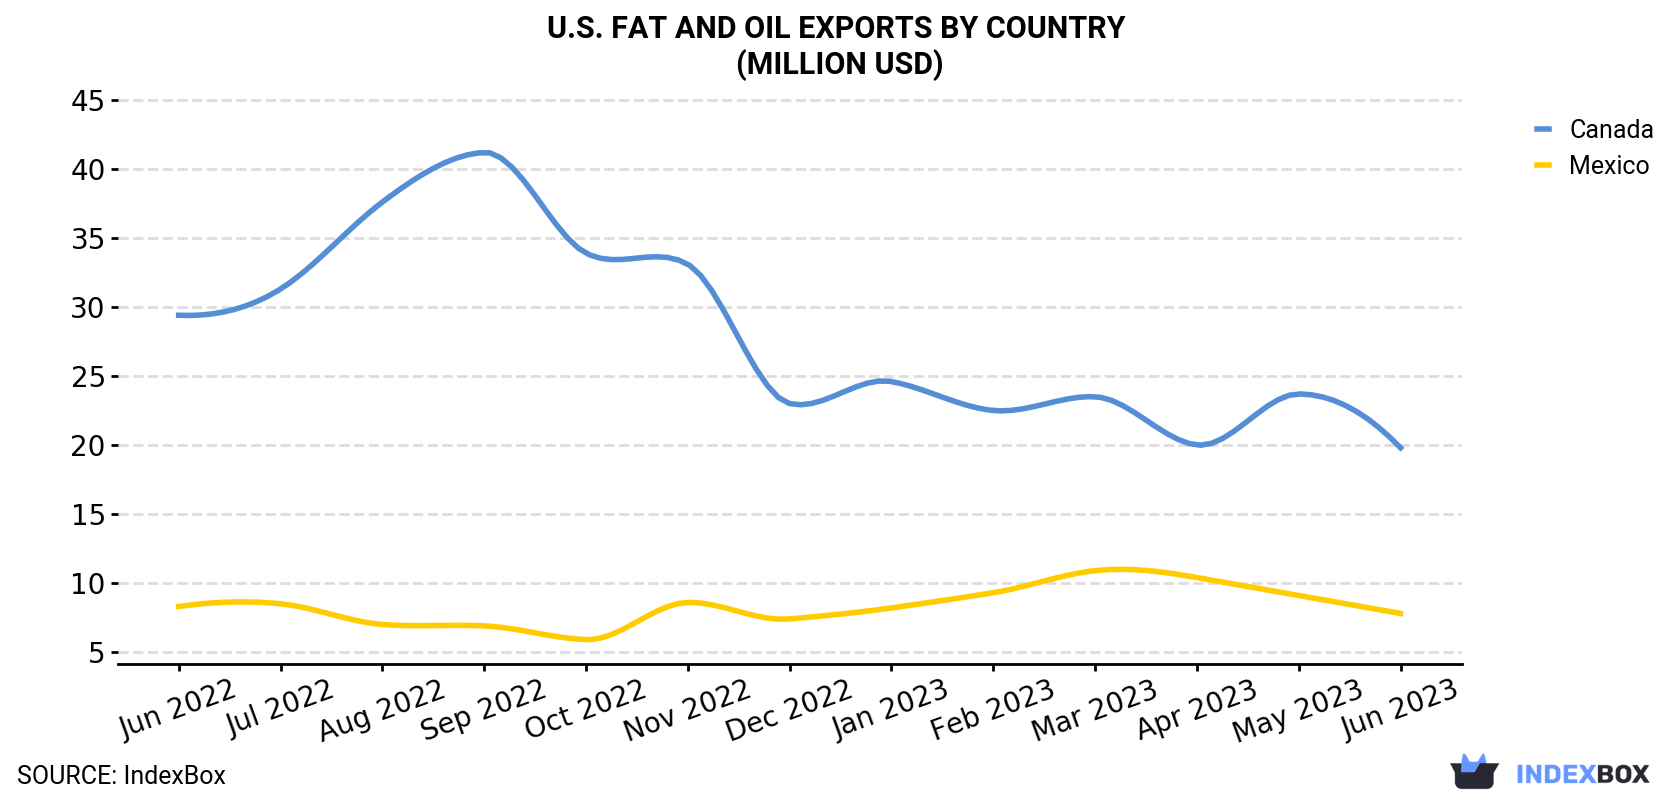 U.S. Fat And Oil Exports By Country (Million USD)